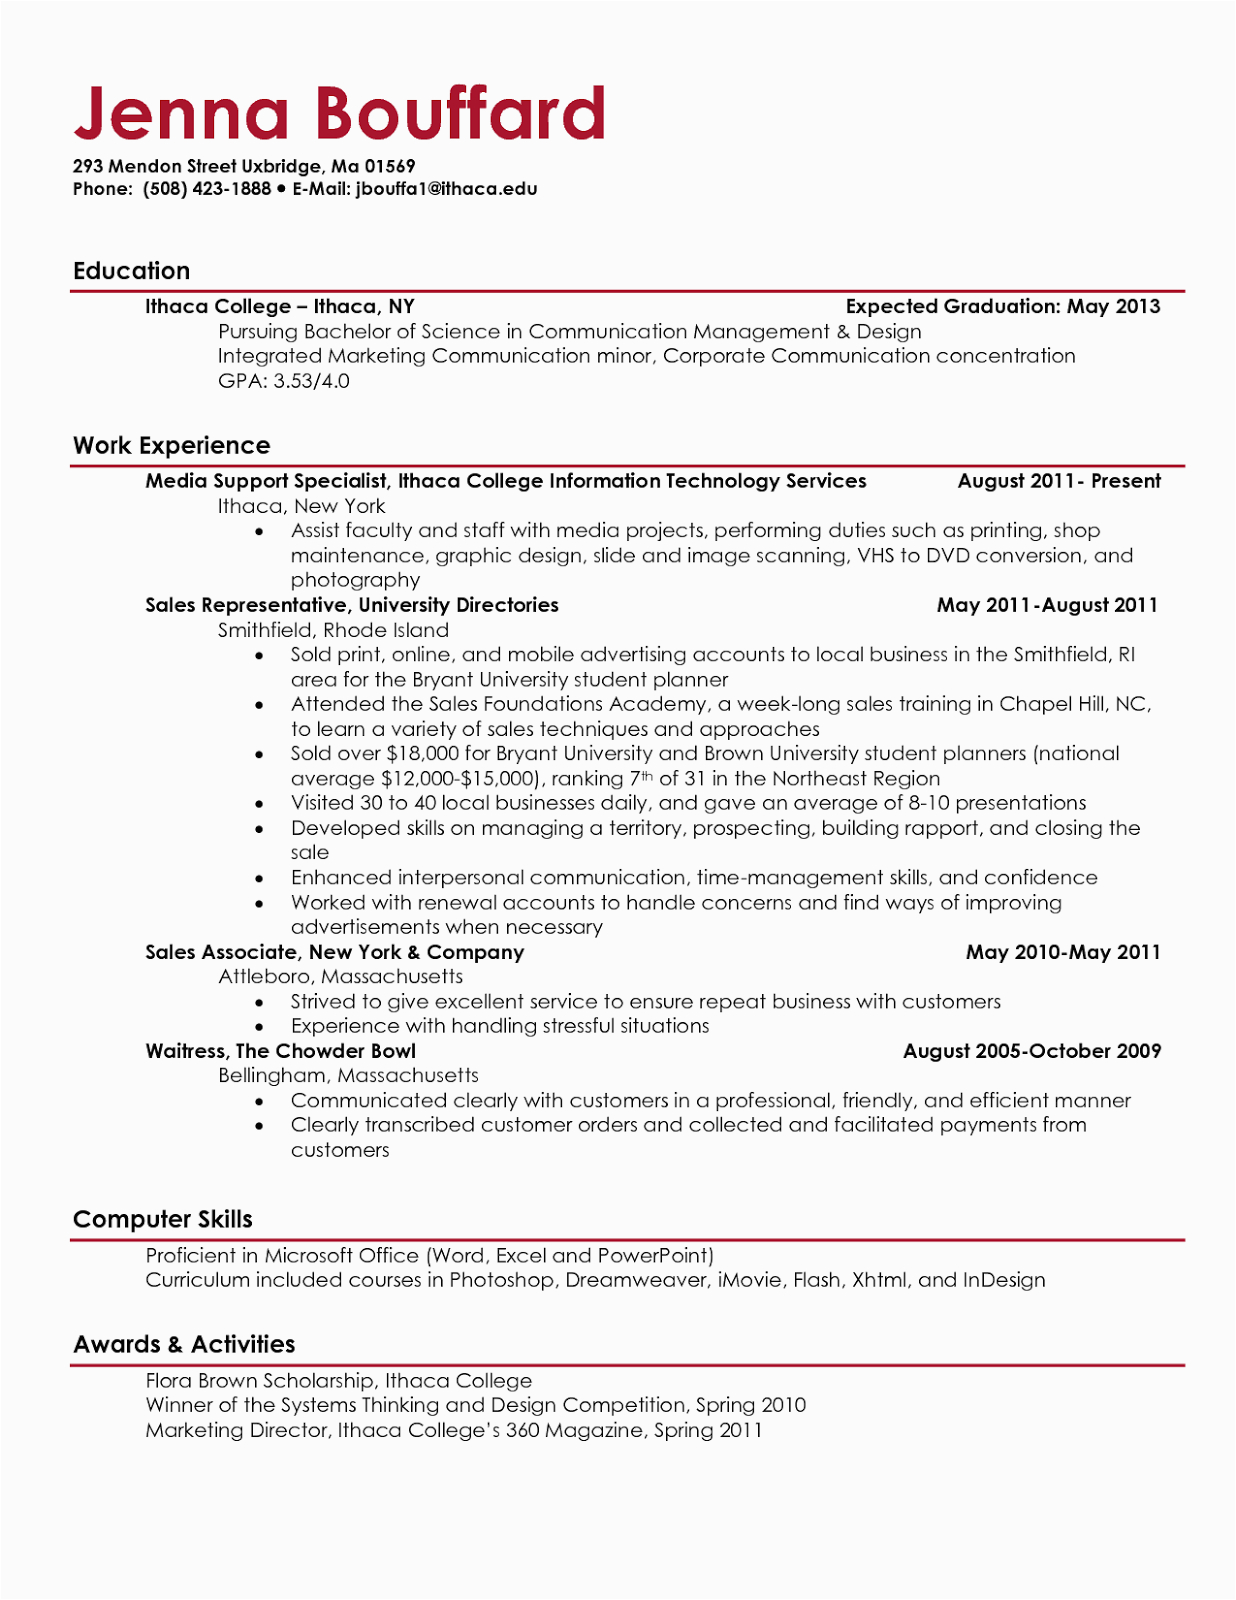 samples of resumes for college students